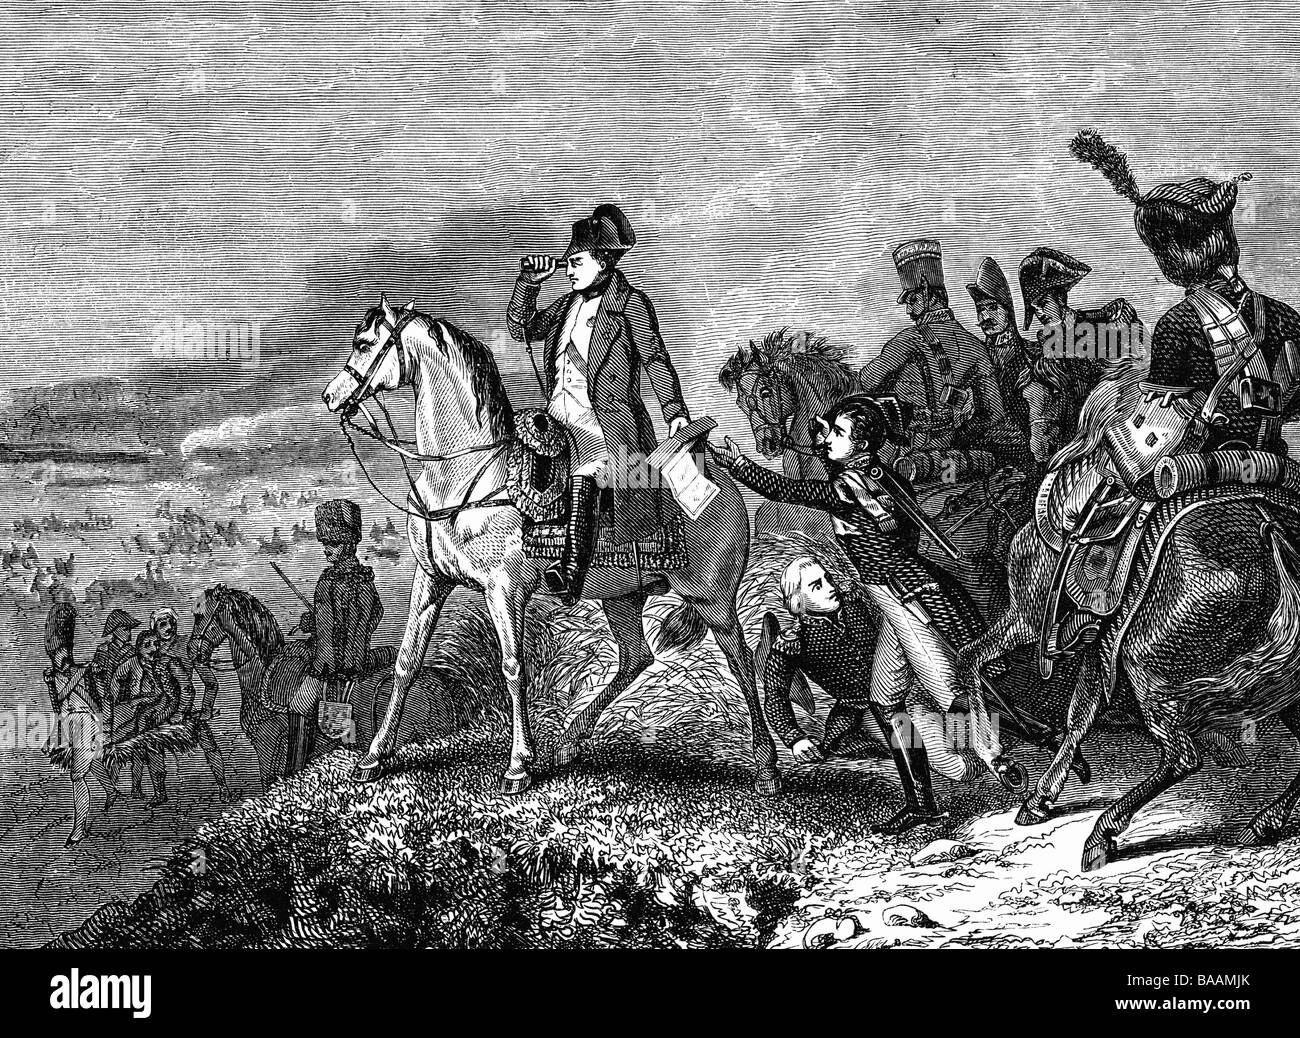 events, War of the Fifth Coalition 1809, Battle of Wagram 5.- 6.7.1809, French Emperor Napoleon I, wood engraving, 19th century, Napoleonic Wars, Austria, general staff, officers, historic, historical, people, Stock Photo